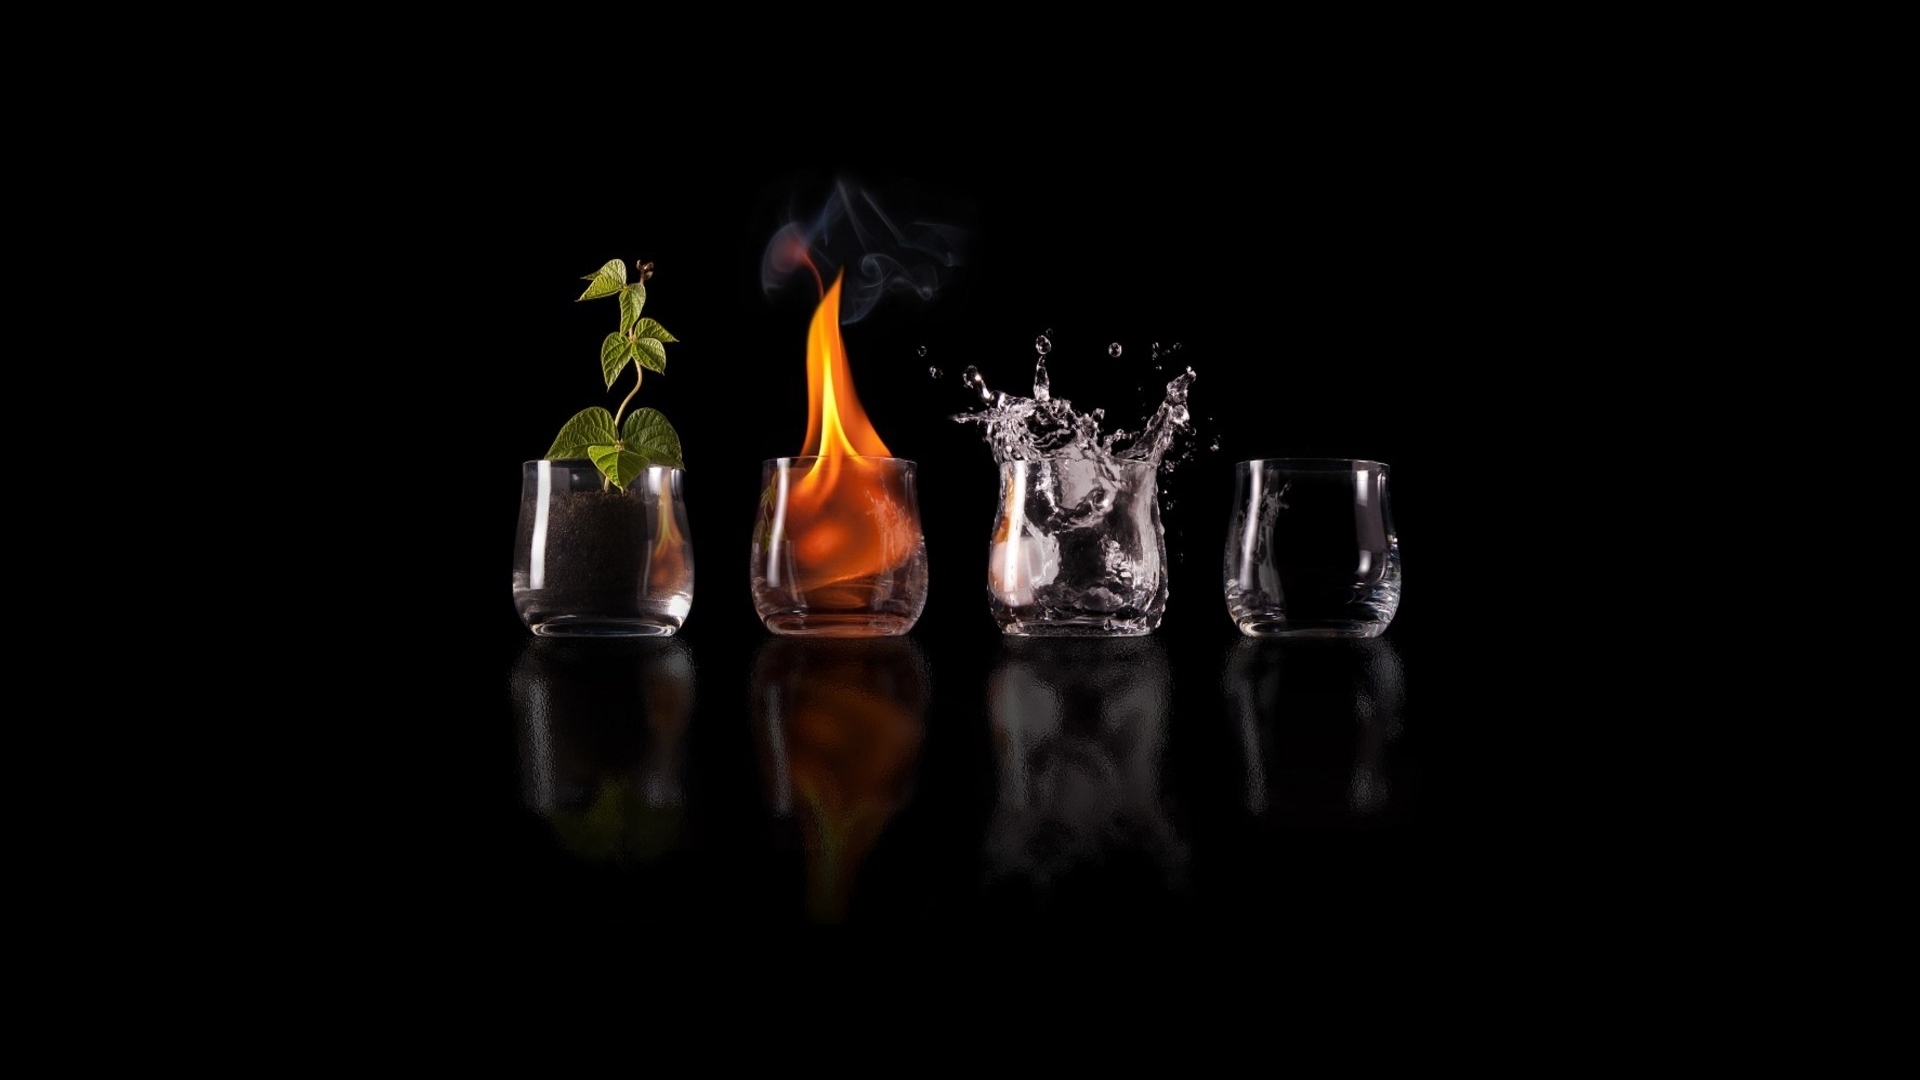 Mobile wallpaper: Water, Leaves, Fire, Background, 24995 download the  picture for free.